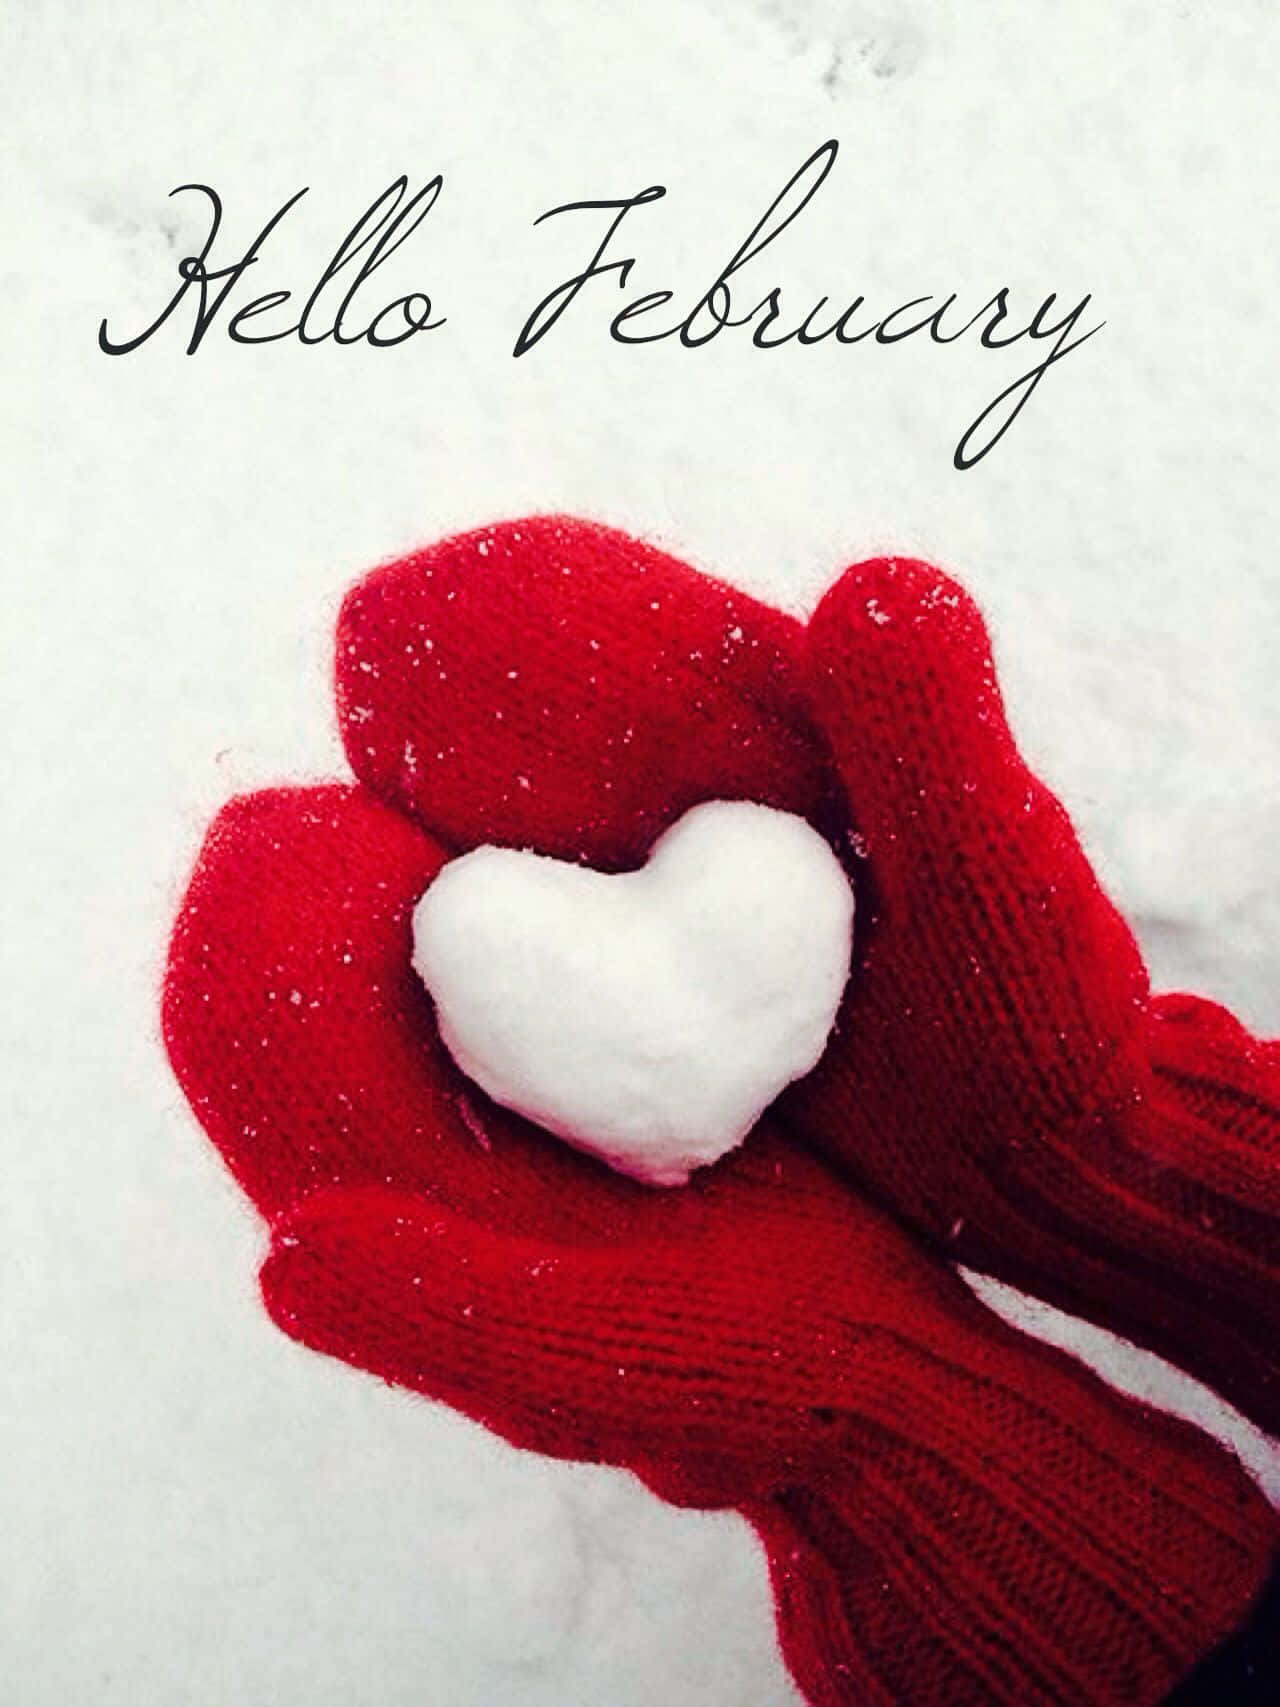 "Welcome to February!  Let's take a moment to celebrate the beauty all around us." Wallpaper